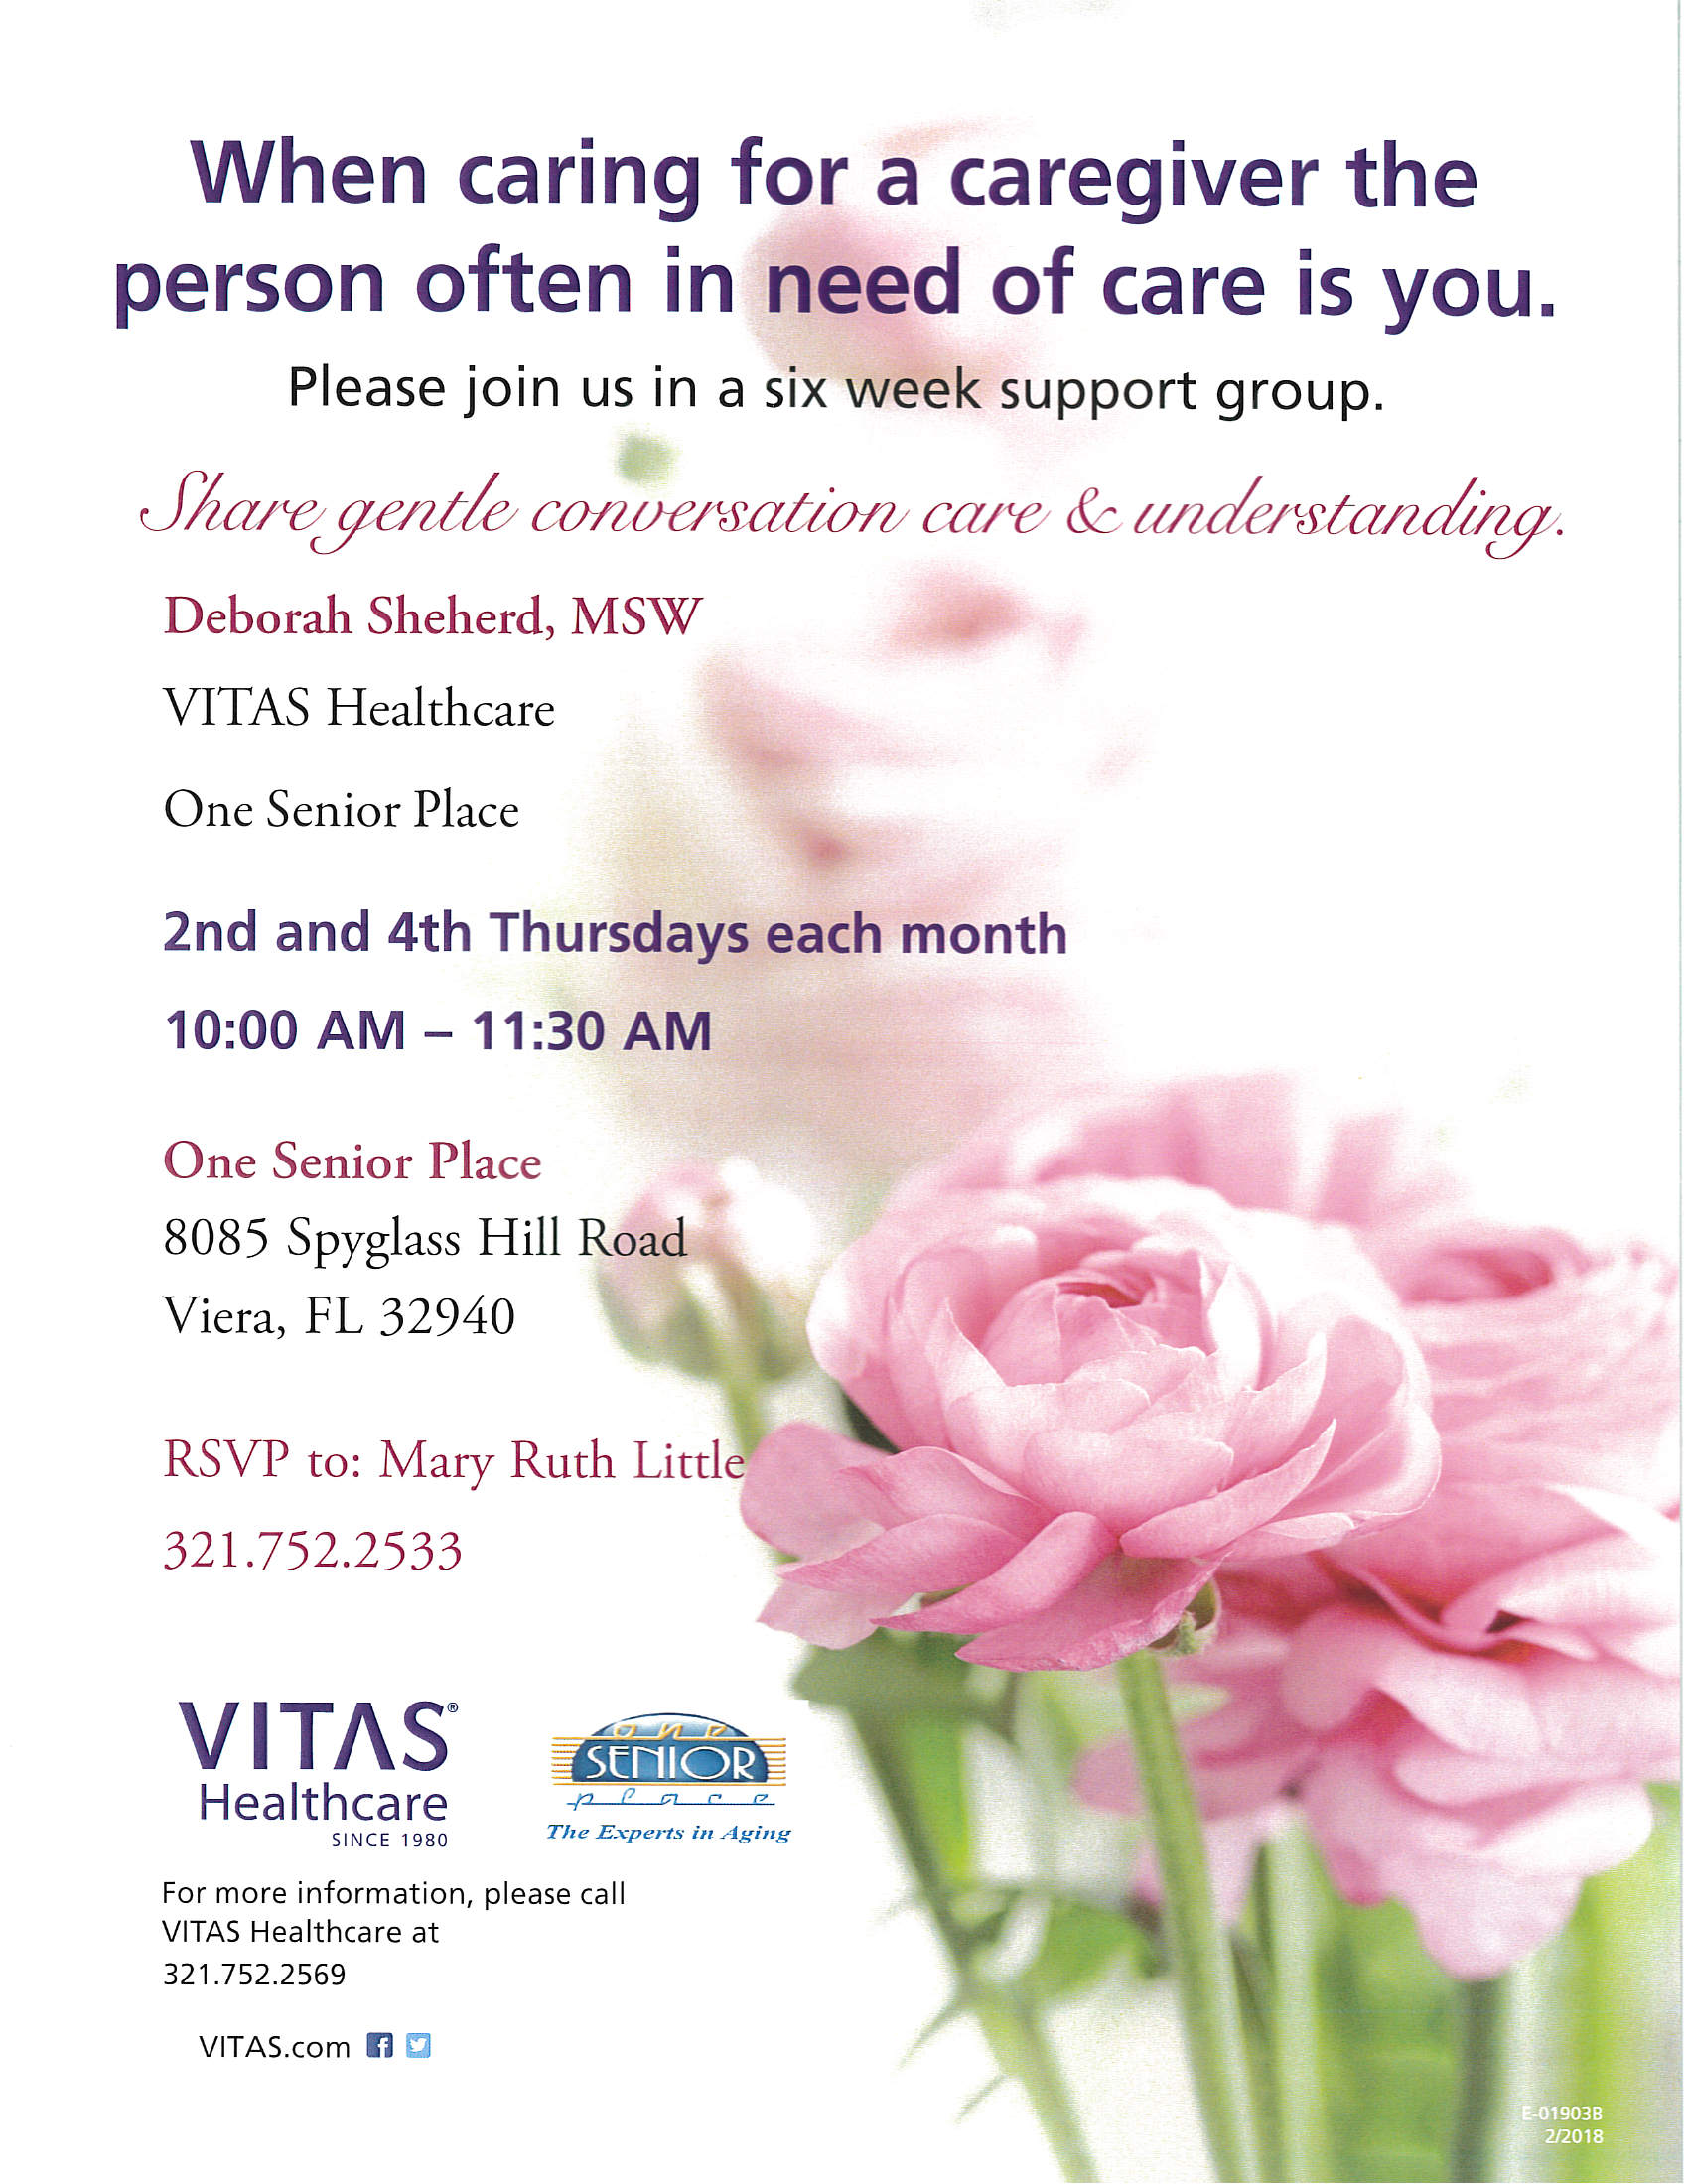 Caregiver Support Group, VITAS Healthcare